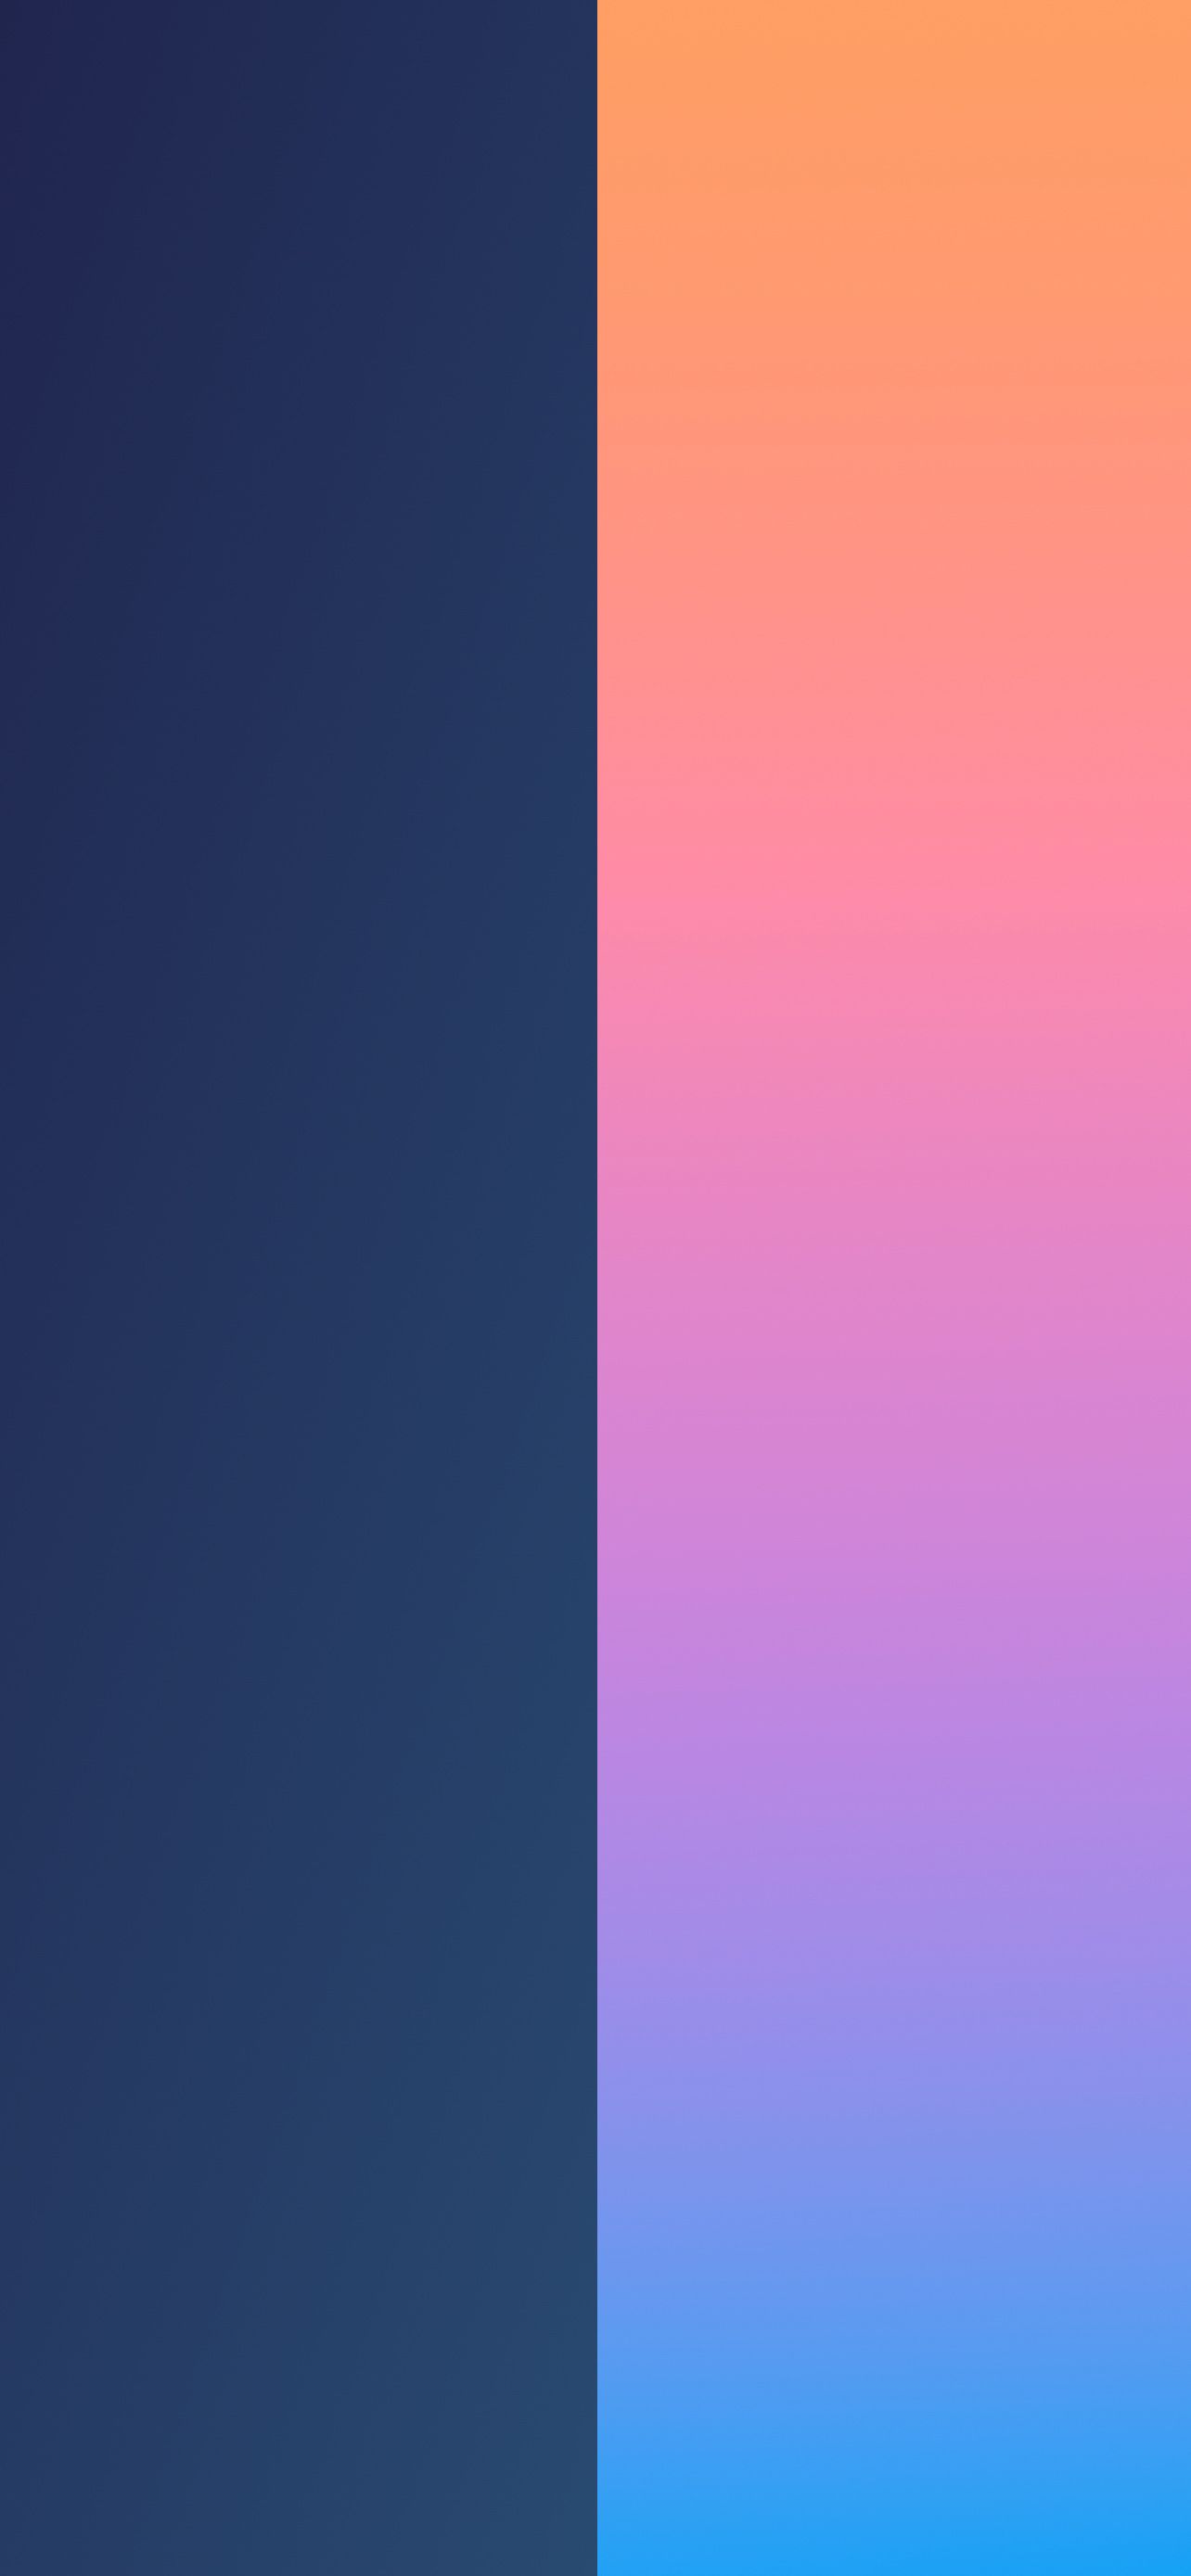 Duo iPhone wallpaper with split colors